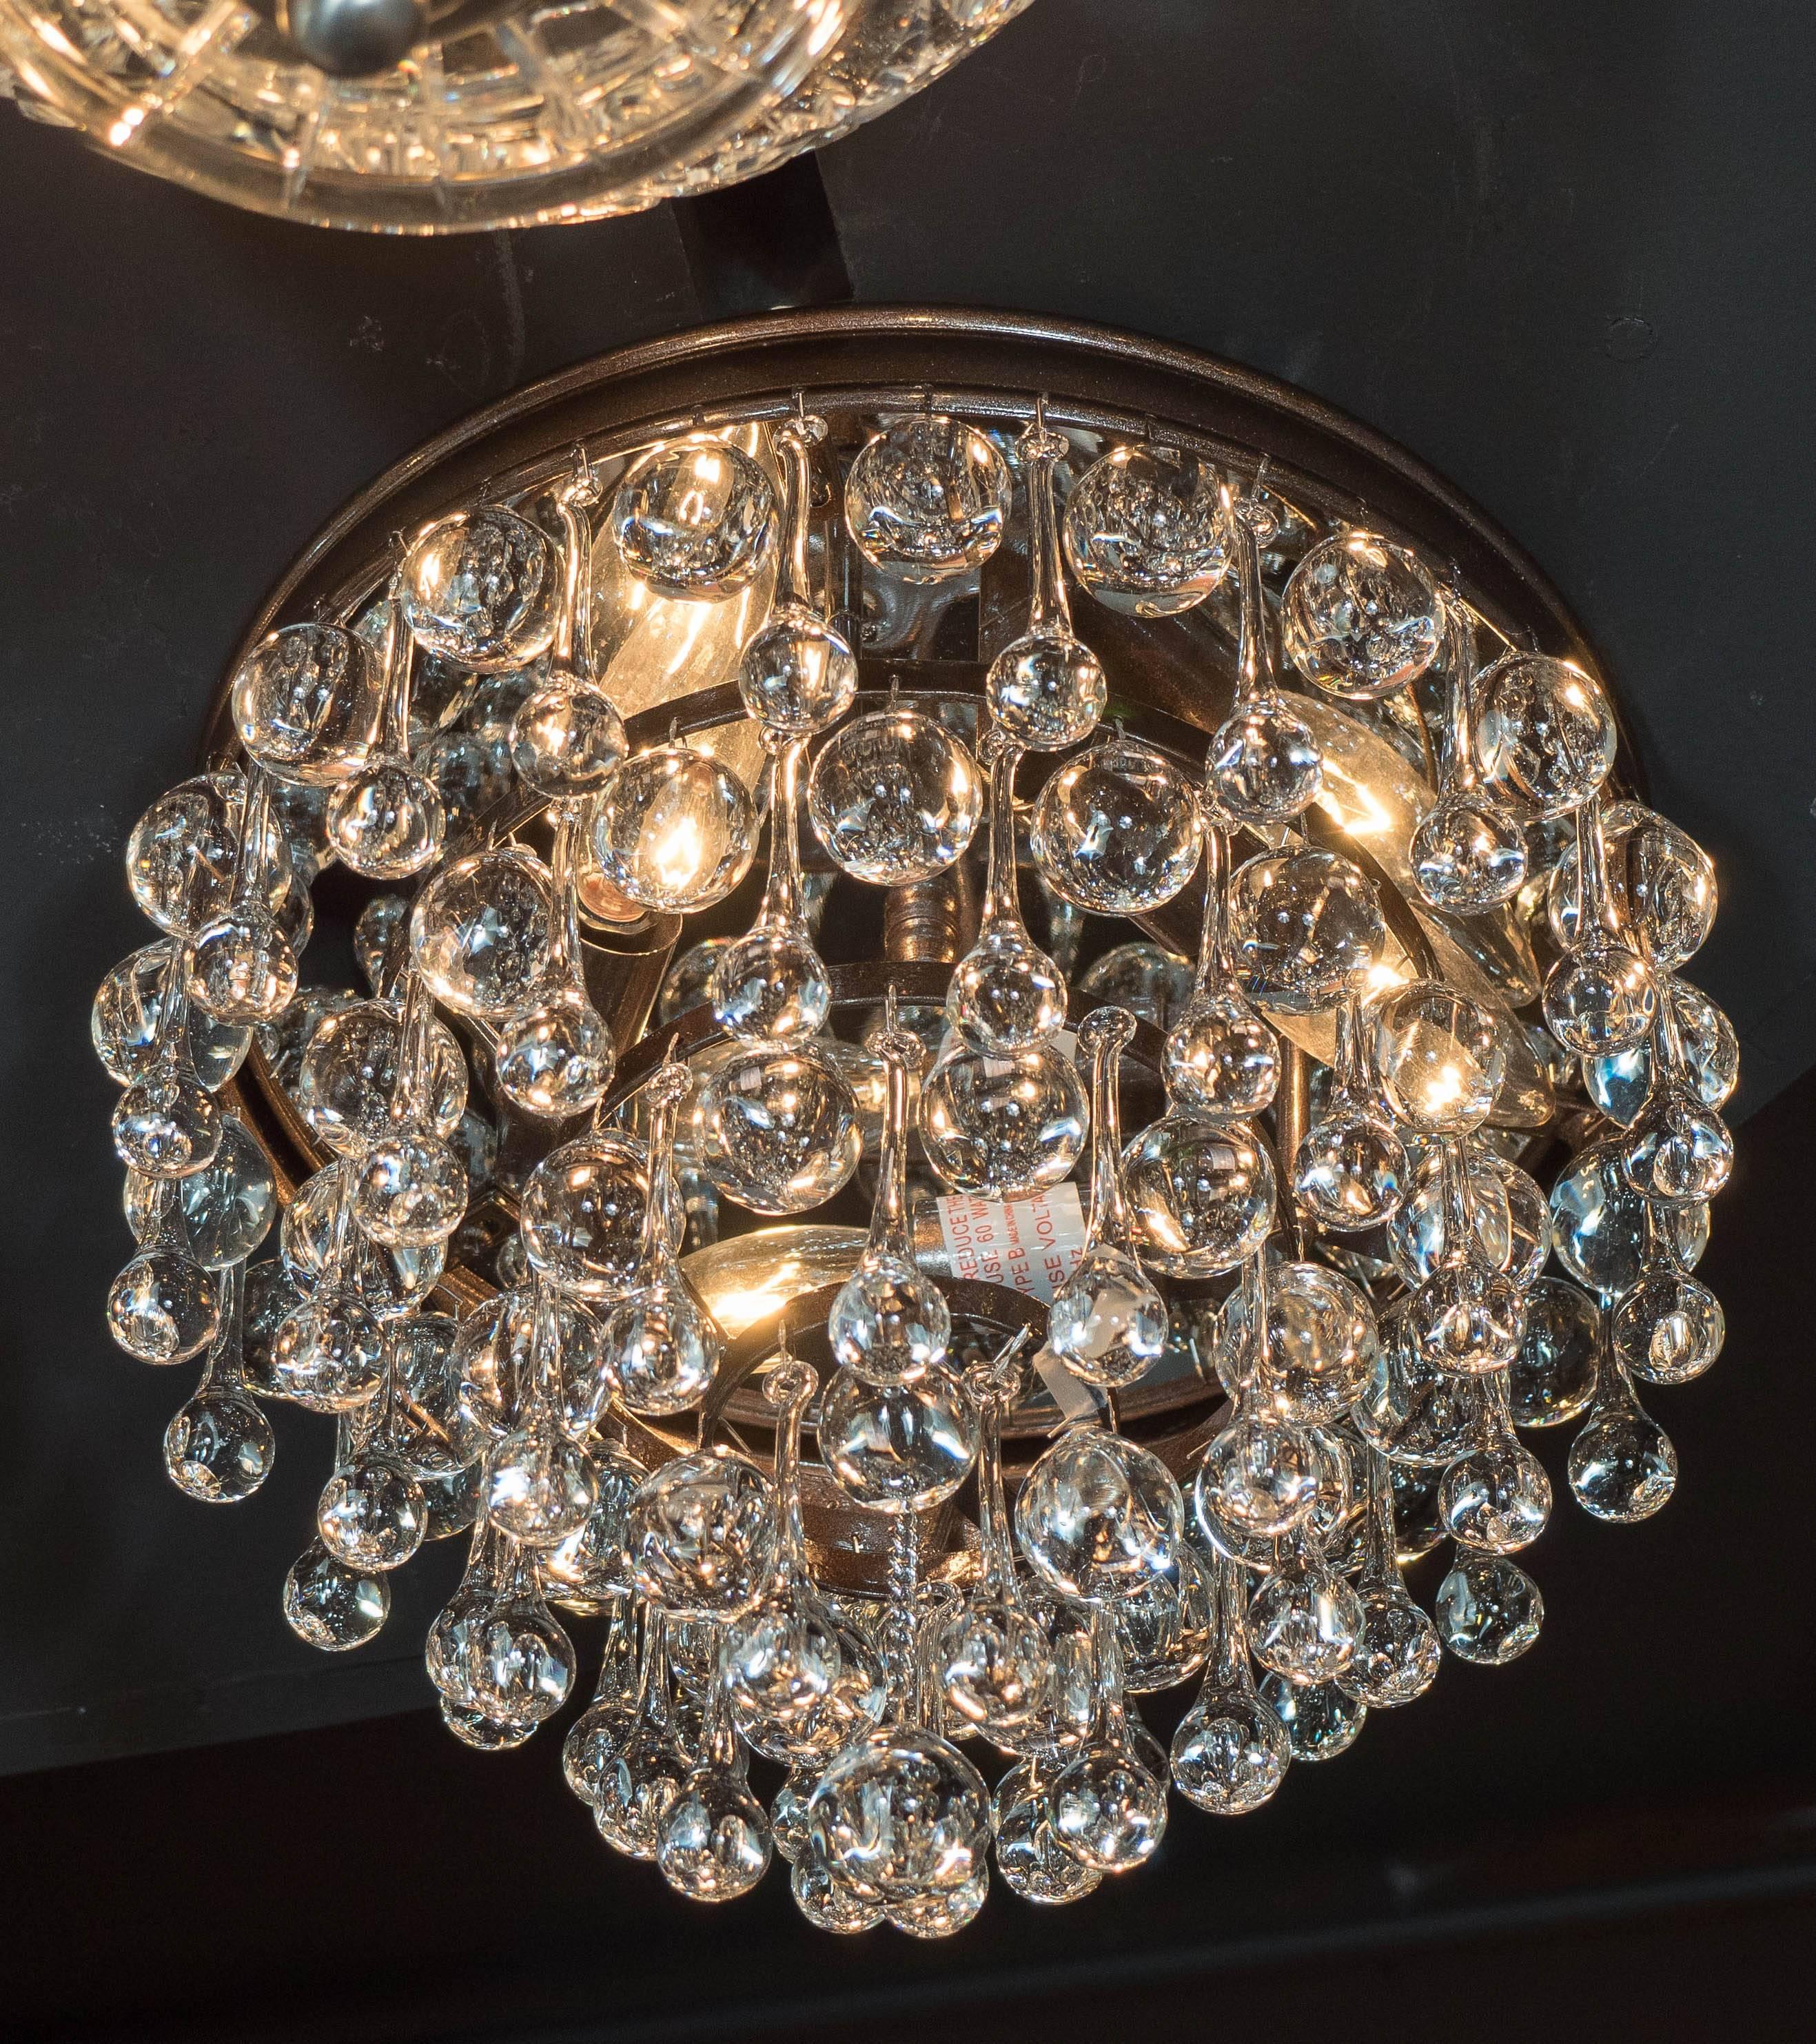 Hollywood Regency Hollywood Teardrop and Crystal Ball Chandelier with Chrome and Handblown Glass